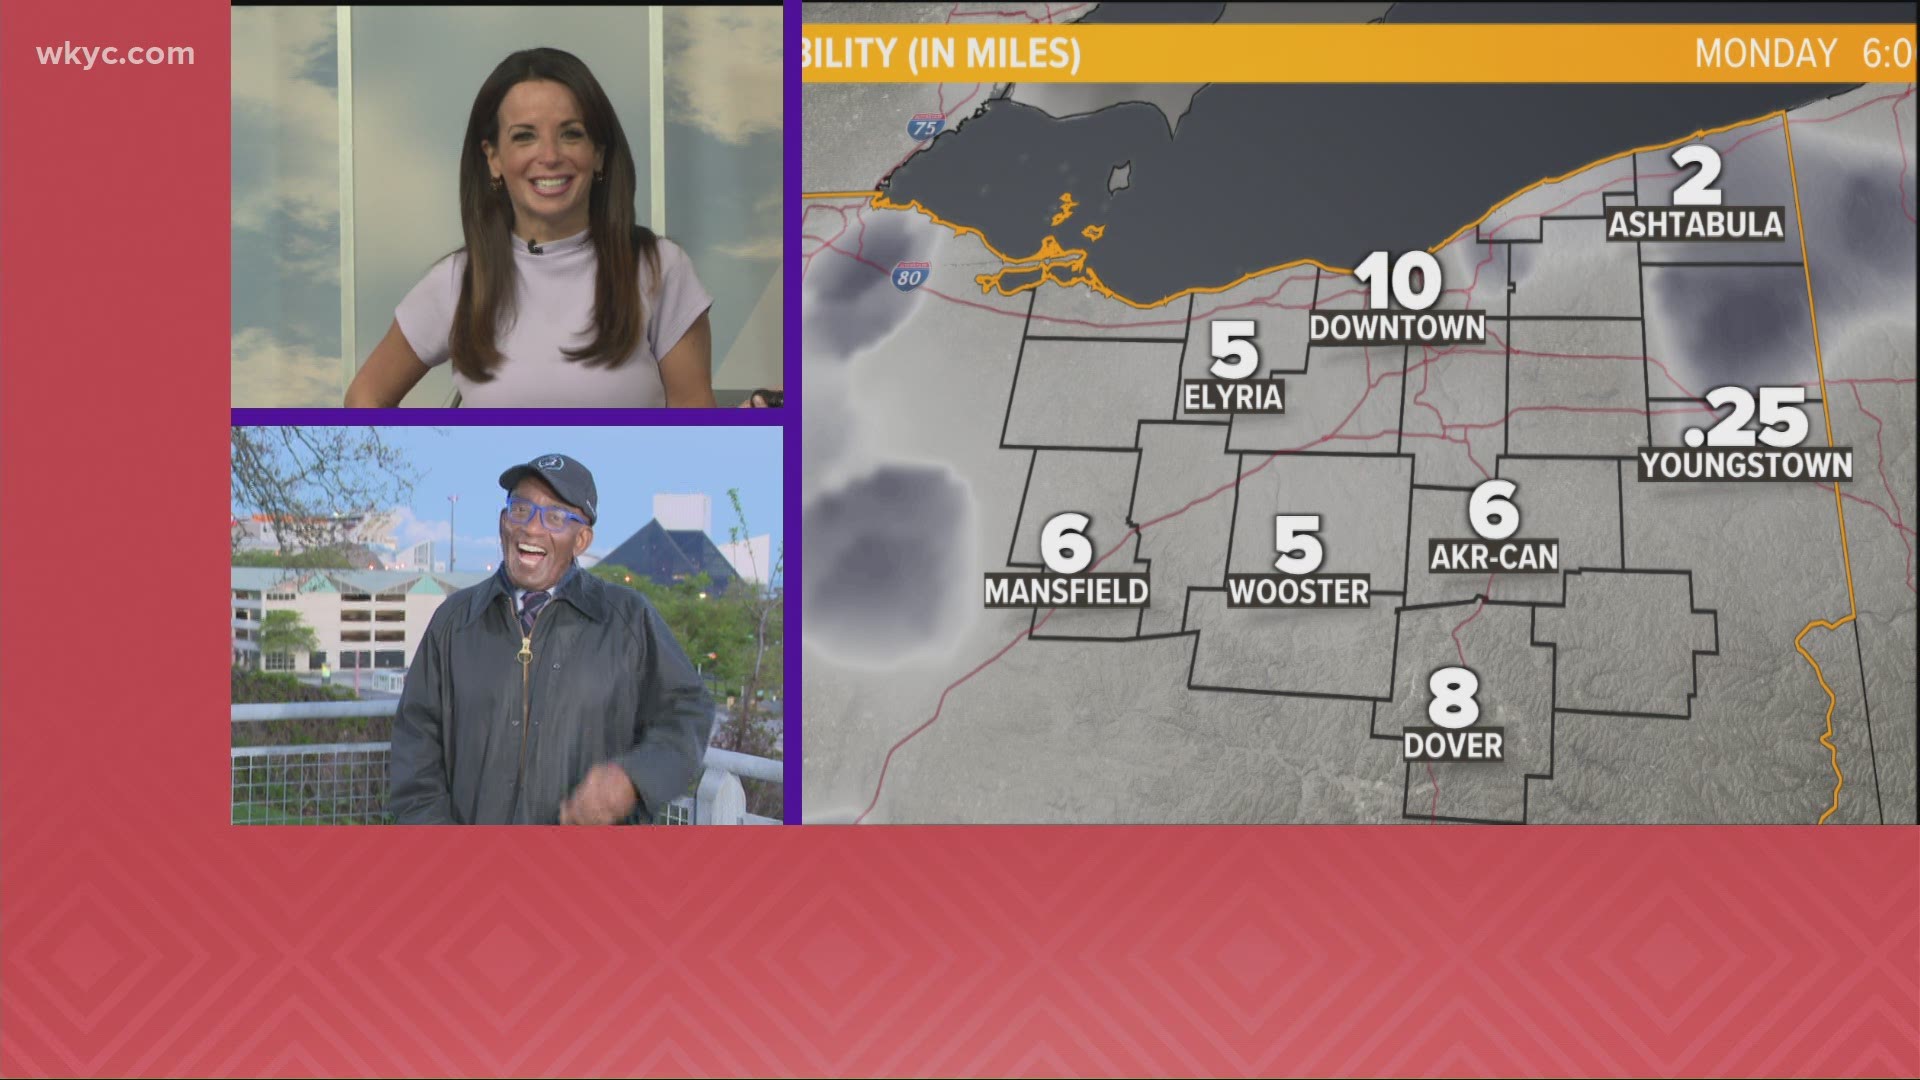 He’s back! Years after starting his career in Cleveland, Al Roker has returned to WKYC. He even jumped in to do the weather with Hollie Strano.